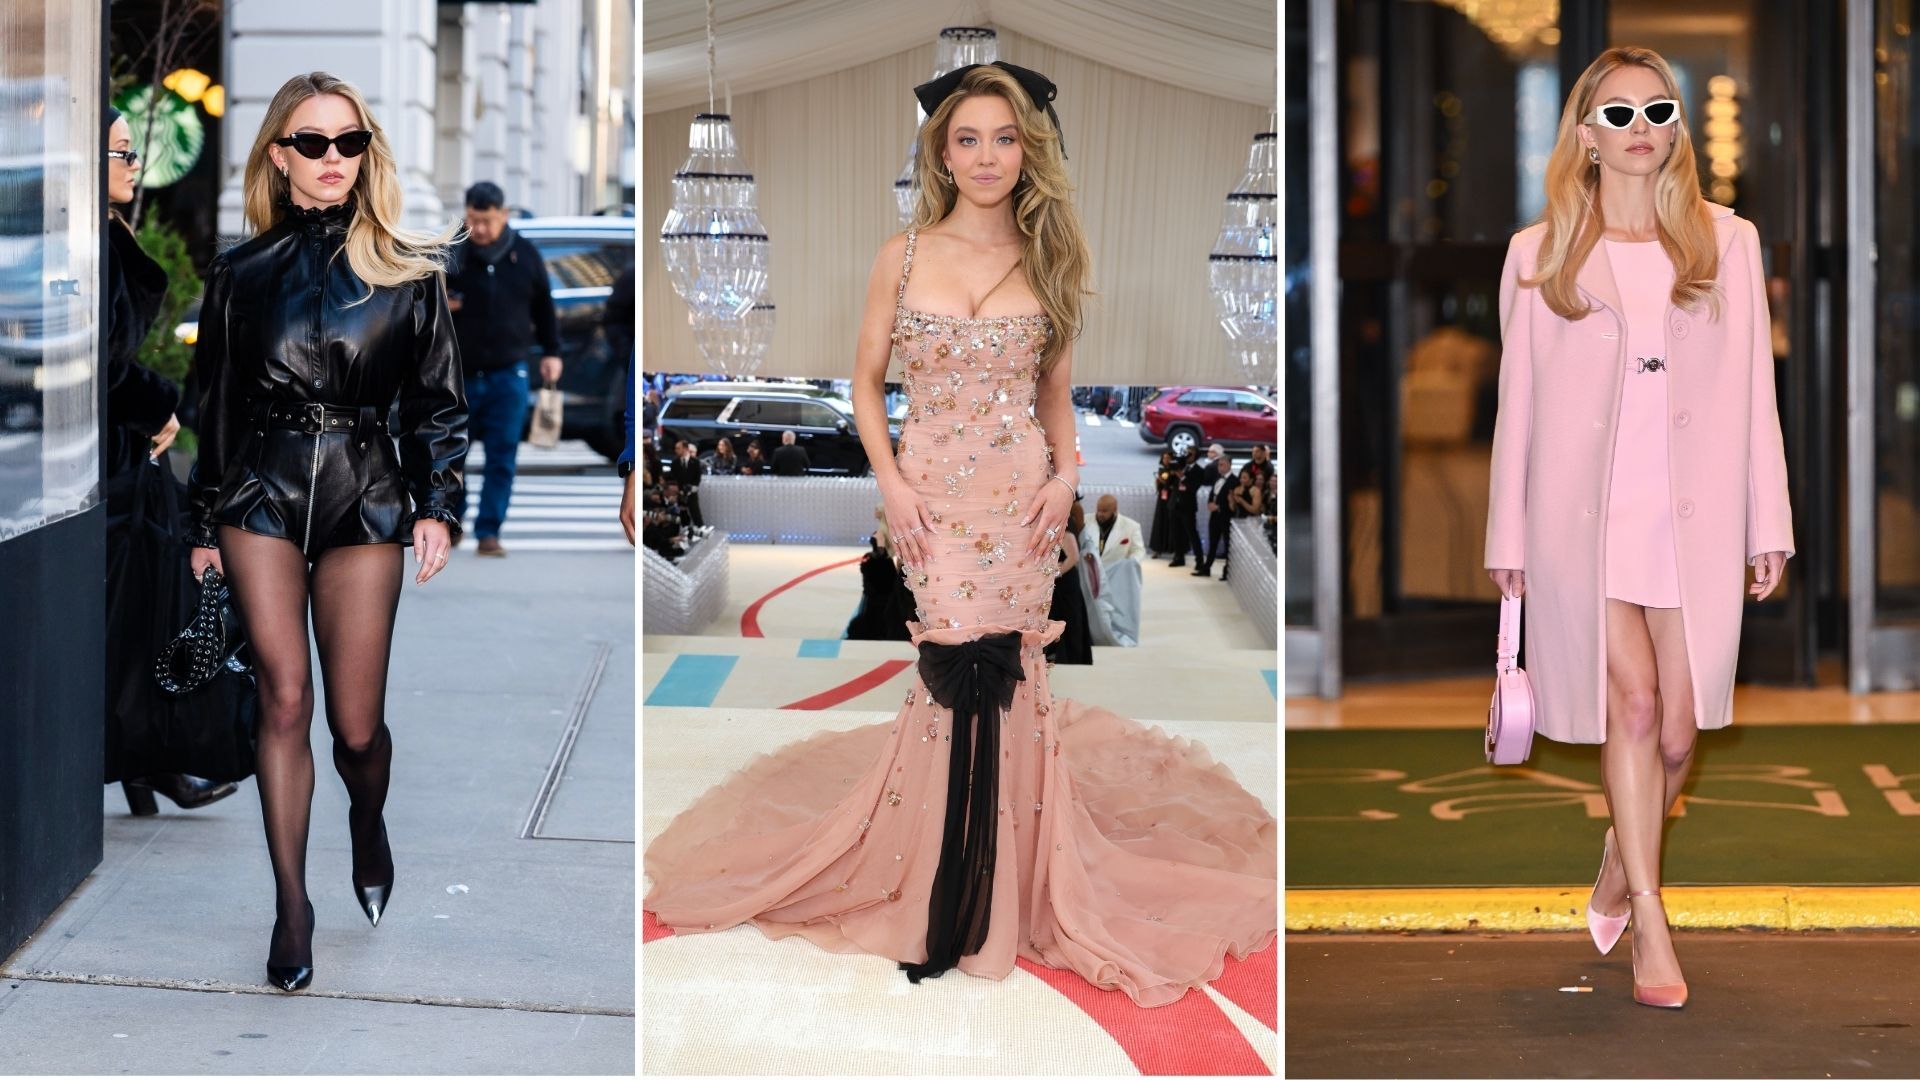 Sydney Sweeney's Best Fashion Moments Collage